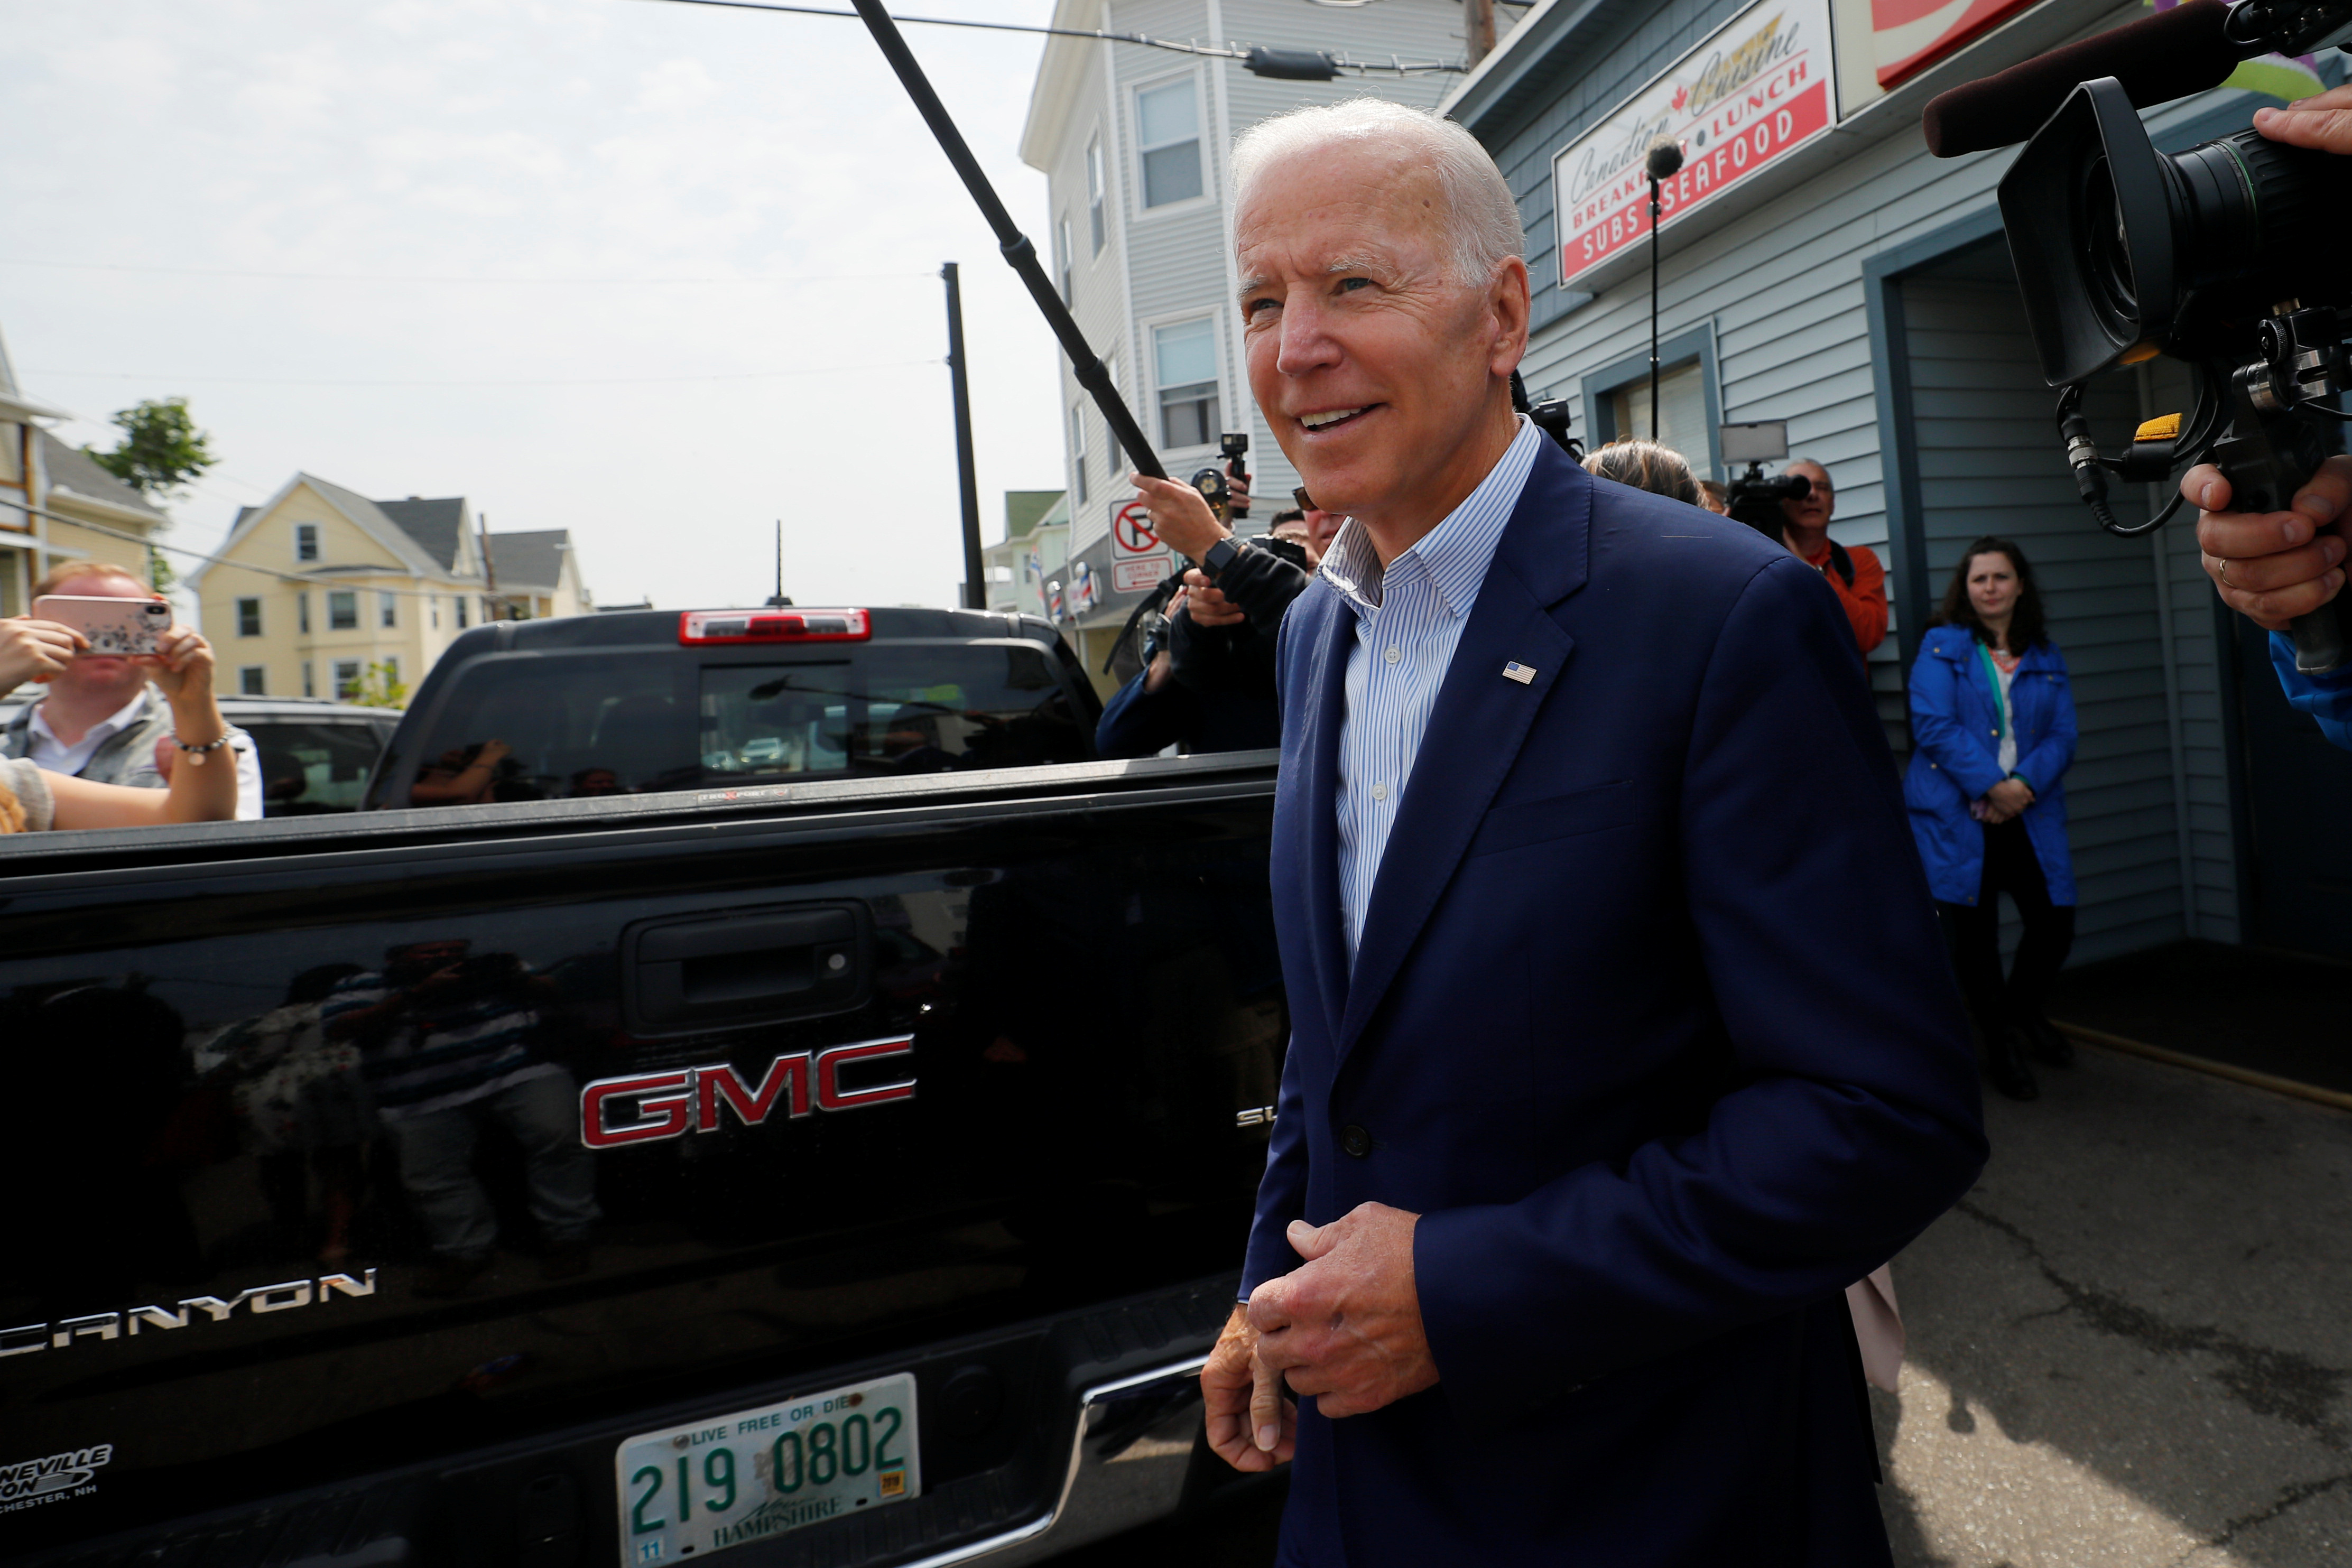 Democratic 2020 U.S. presidential candidate Biden departs after a campaign stop at Chez Vachon restaurant in Manchester